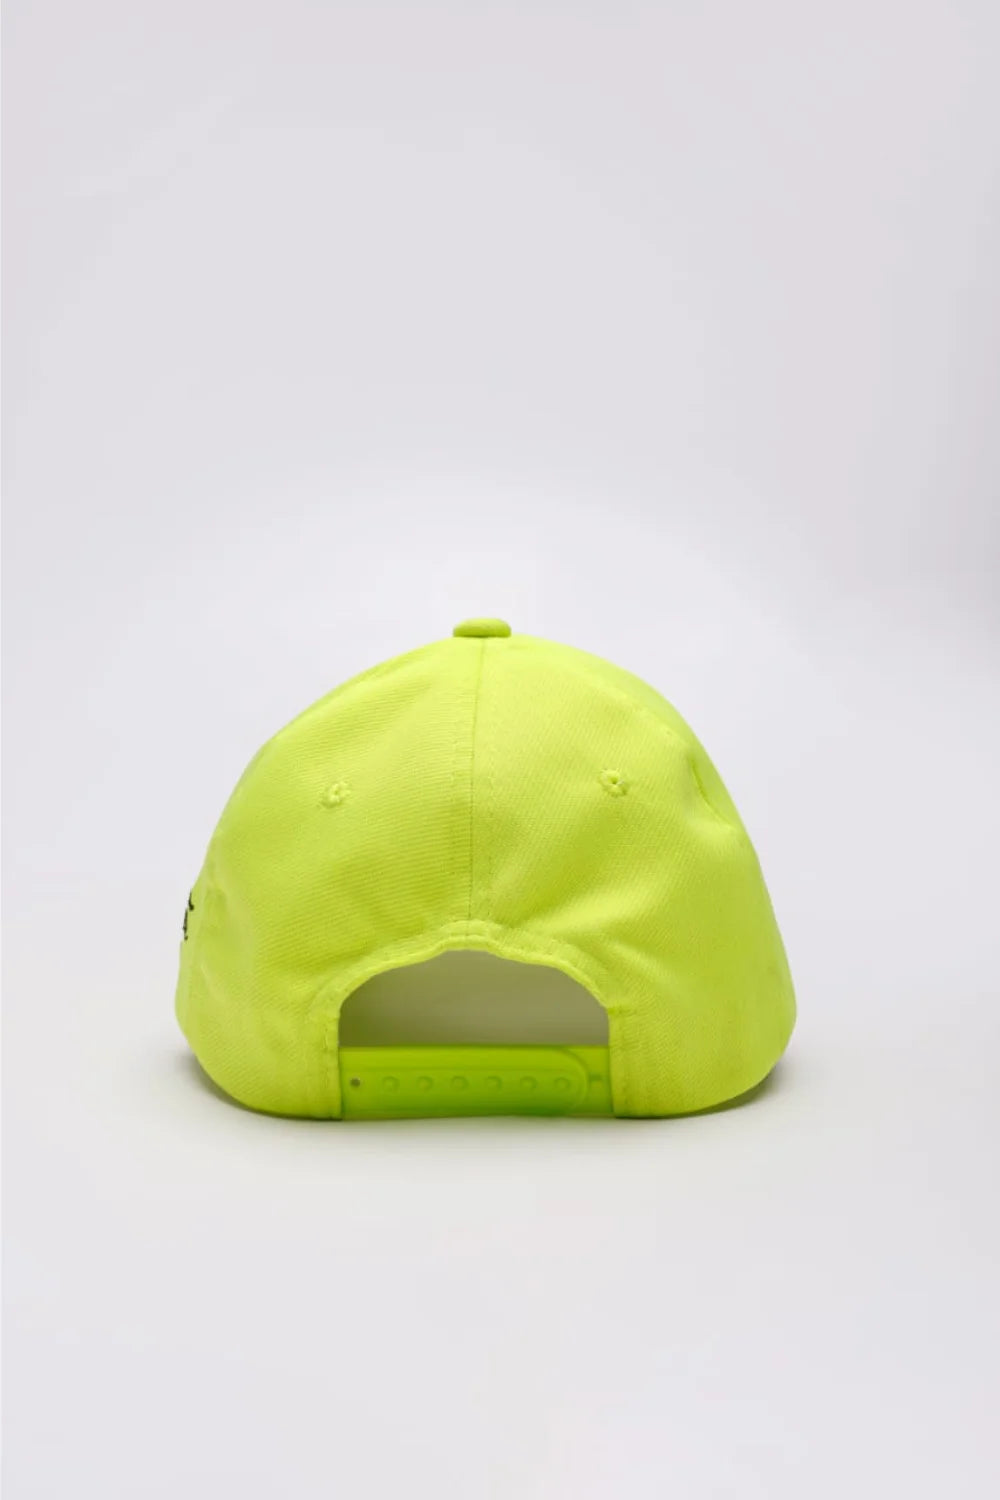 Unisex Yellow solid baseball cap, has a visor by One Player